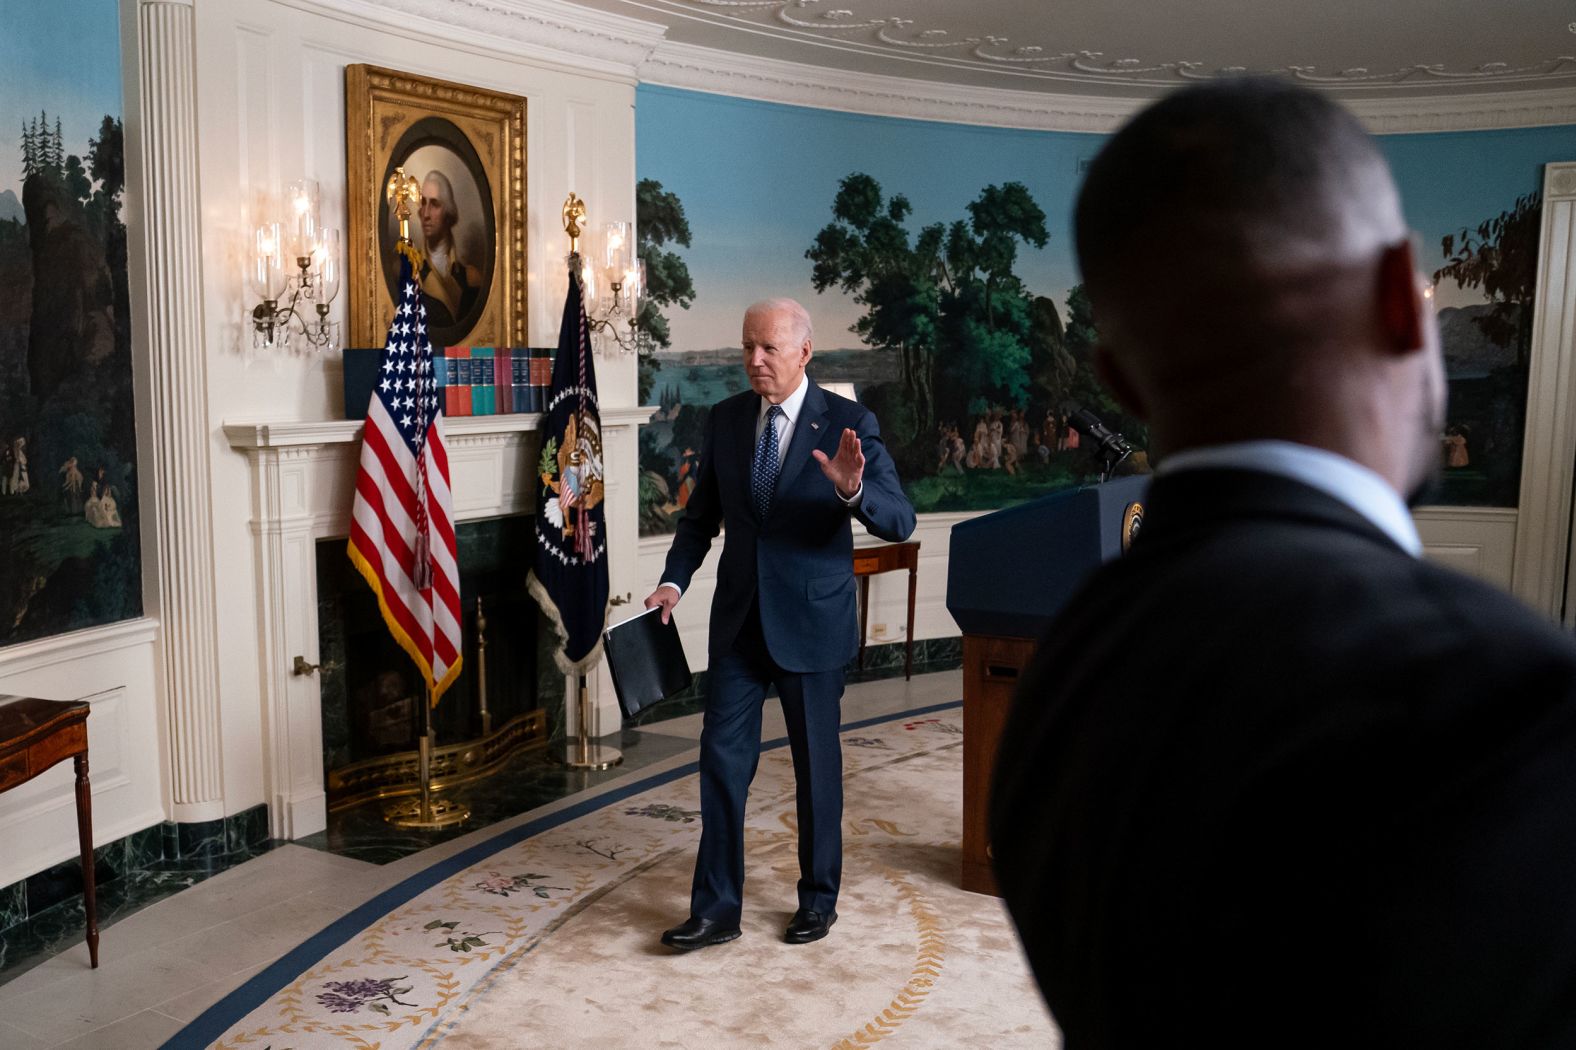 US President Joe Biden leaves the Diplomatic Reception Room of the White House on Thursday, February 8, a short time after <a href="index.php?page=&url=https%3A%2F%2Fwww.cnn.com%2F2024%2F02%2F08%2Fpolitics%2Fwhite-house-special-counsels-report-response%2Findex.html">the release of a special counsel report</a> that concluded he willfully retained and disclosed classified military and national security information. Special counsel Robert Hur recommended that Biden, who cooperated fully with the investigation, not face charges, but his report raised questions about Biden’s memory. In a statement Thursday night, <a href="index.php?page=&url=https%3A%2F%2Fwww.cnn.com%2F2024%2F02%2F09%2Fpolitics%2Fbiden-fury-special-counsels-report%2Findex.html">a visibly angry Biden defended himself</a>: “I know what the hell I’m doing.”